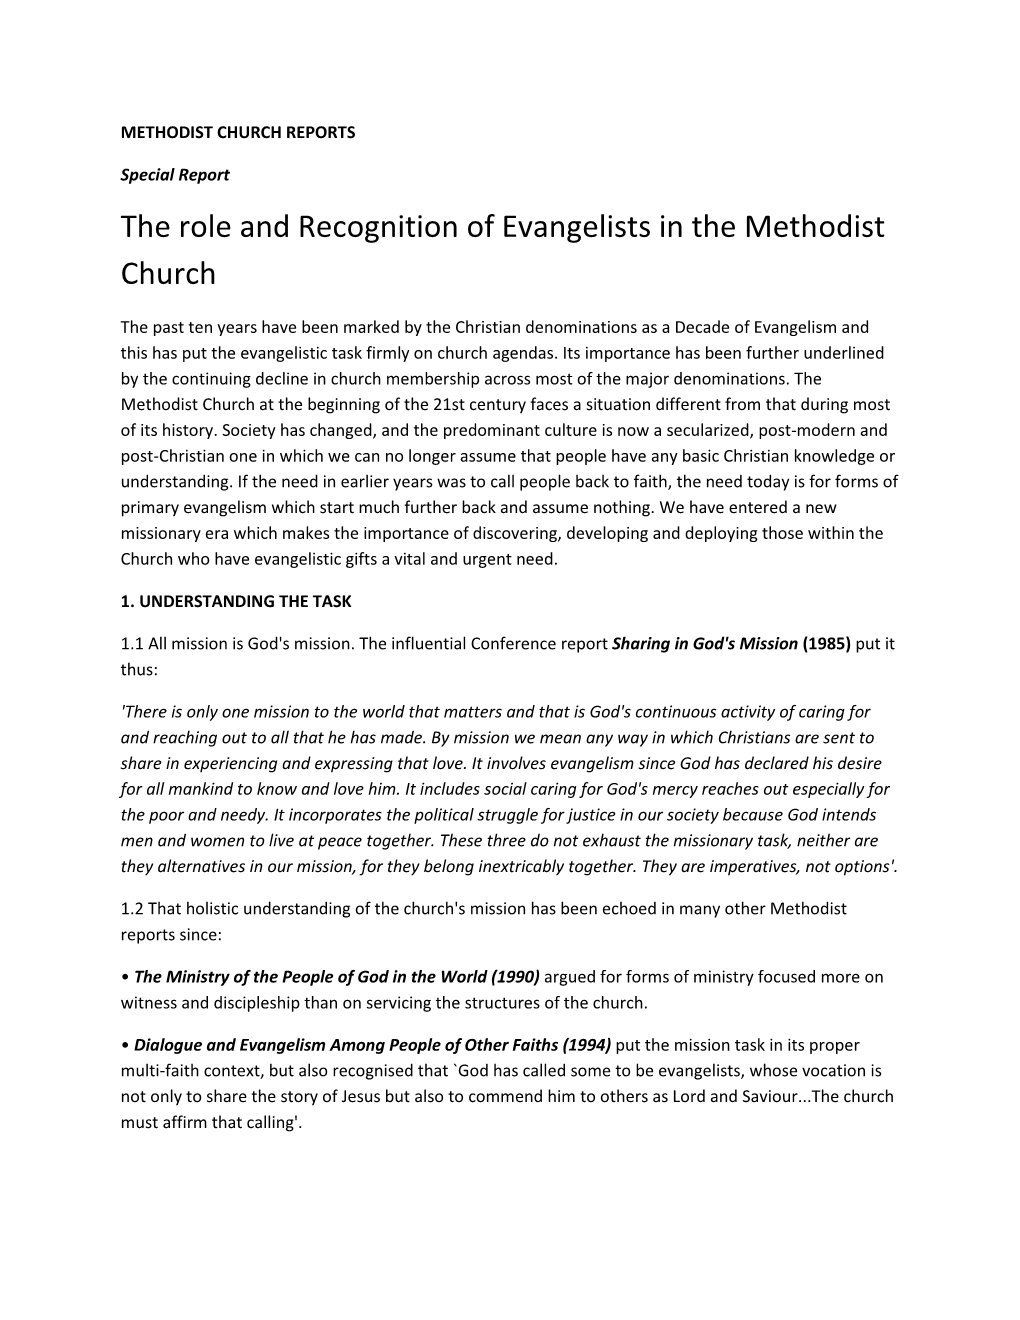 The Role and Recognition of Evangelists in the Methodist Church